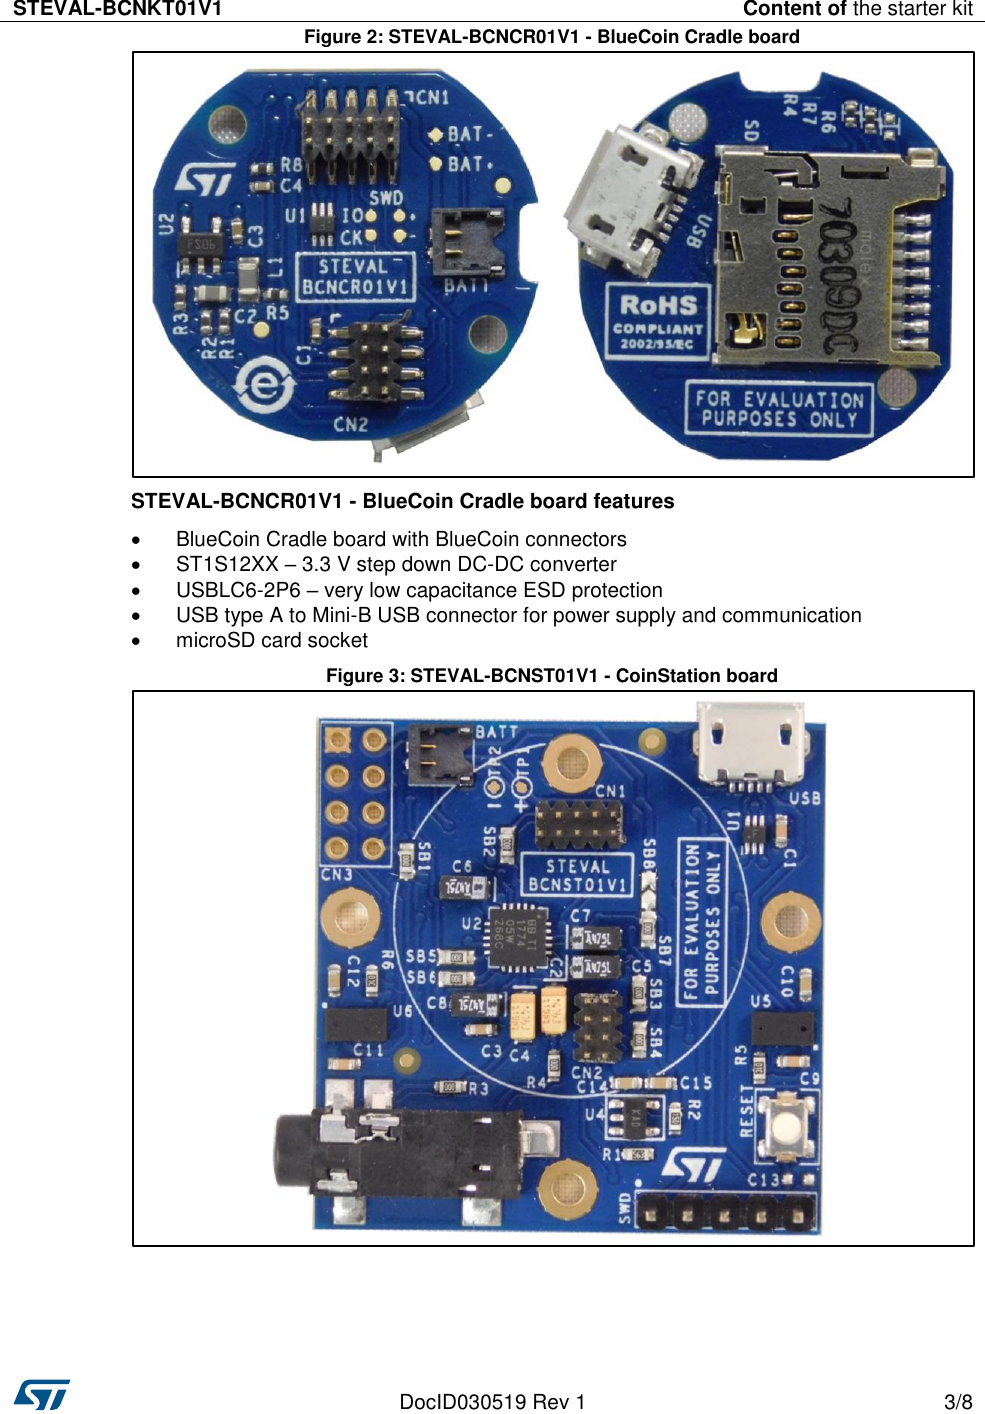 STEVAL-BCNKT01V1 Content of the starter kit   DocID030519 Rev 1 3/8  Figure 2: STEVAL-BCNCR01V1 - BlueCoin Cradle board  STEVAL-BCNCR01V1 - BlueCoin Cradle board features   BlueCoin Cradle board with BlueCoin connectors   ST1S12XX – 3.3 V step down DC-DC converter    USBLC6-2P6 – very low capacitance ESD protection   USB type A to Mini-B USB connector for power supply and communication   microSD card socket Figure 3: STEVAL-BCNST01V1 - CoinStation board     